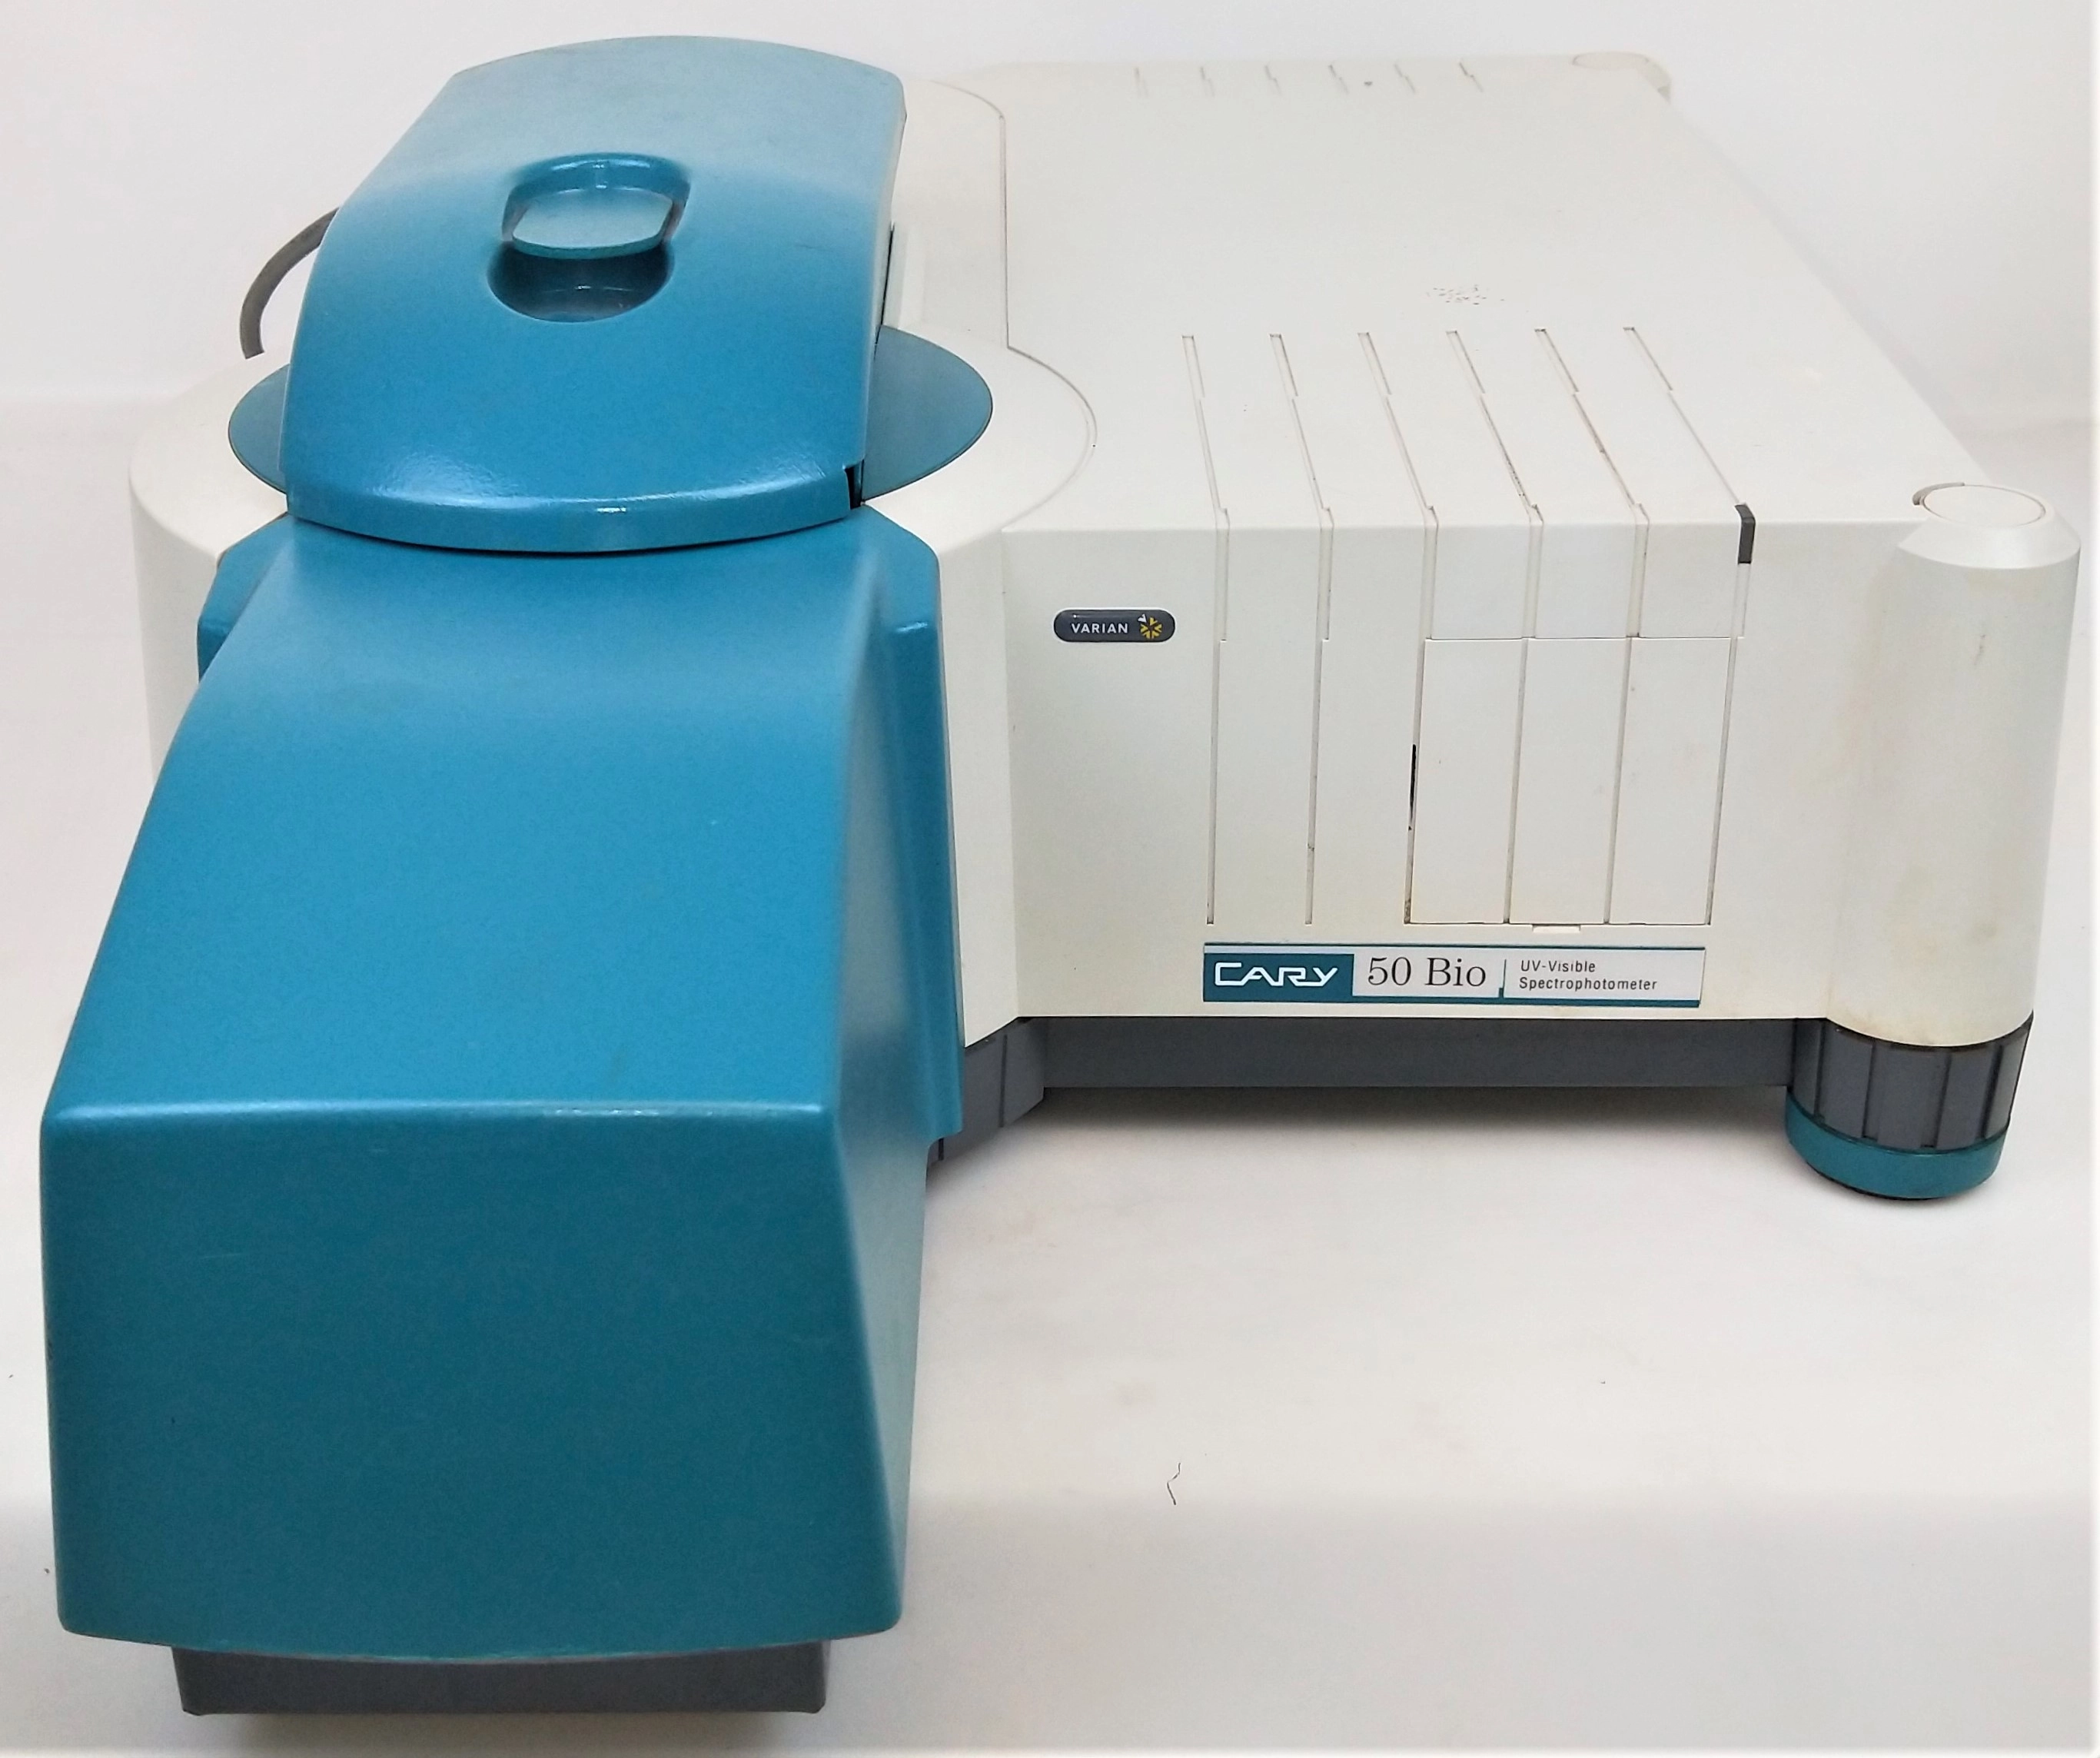 Varian Cary 50 Bio UV-Visible Spectrophotometer - 190 to 1100 nm